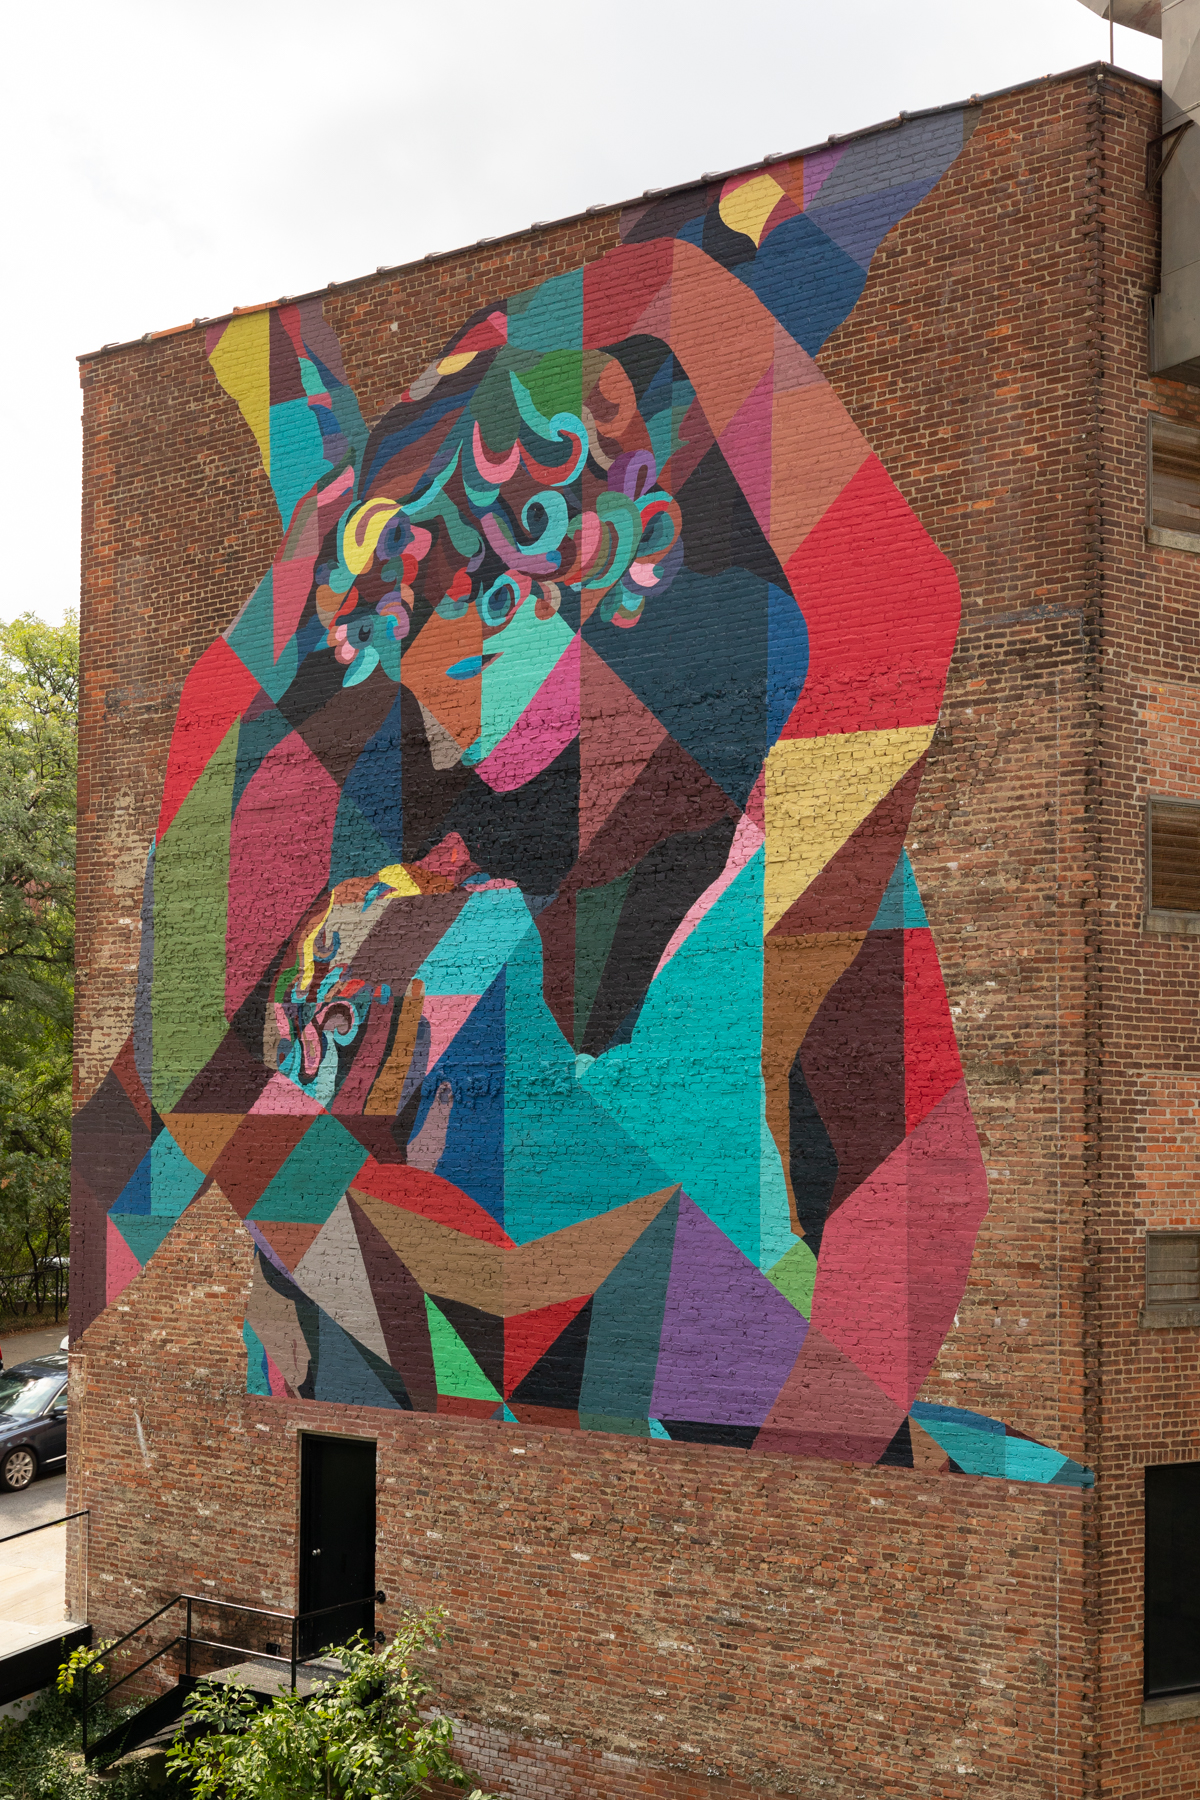 Colossal Media hand-painted mural in Dumbo Brooklyn, NY, with art by Finley.